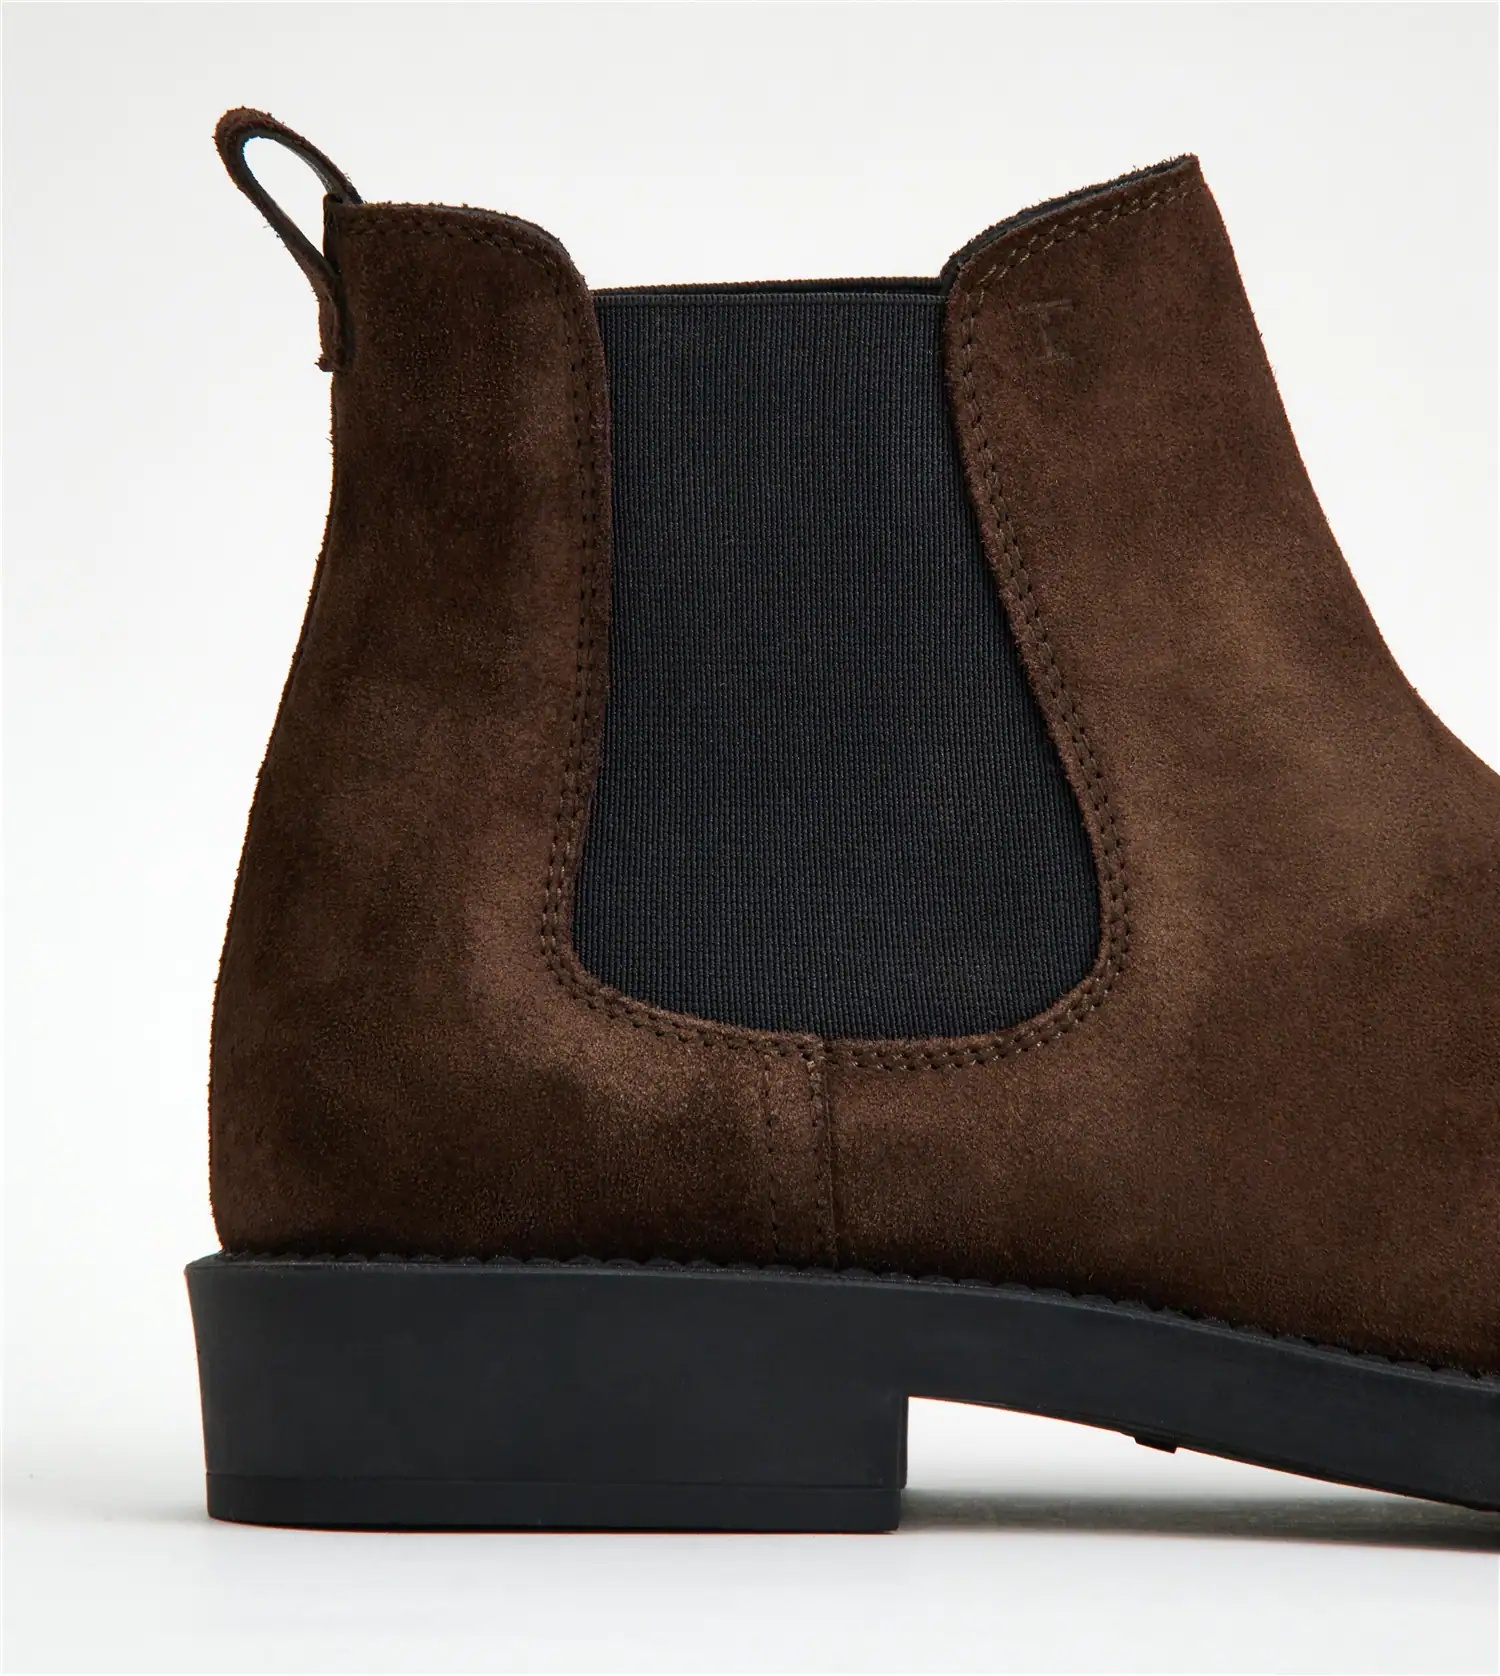 ANKLE BOOTS IN SUEDE - BROWN - 5